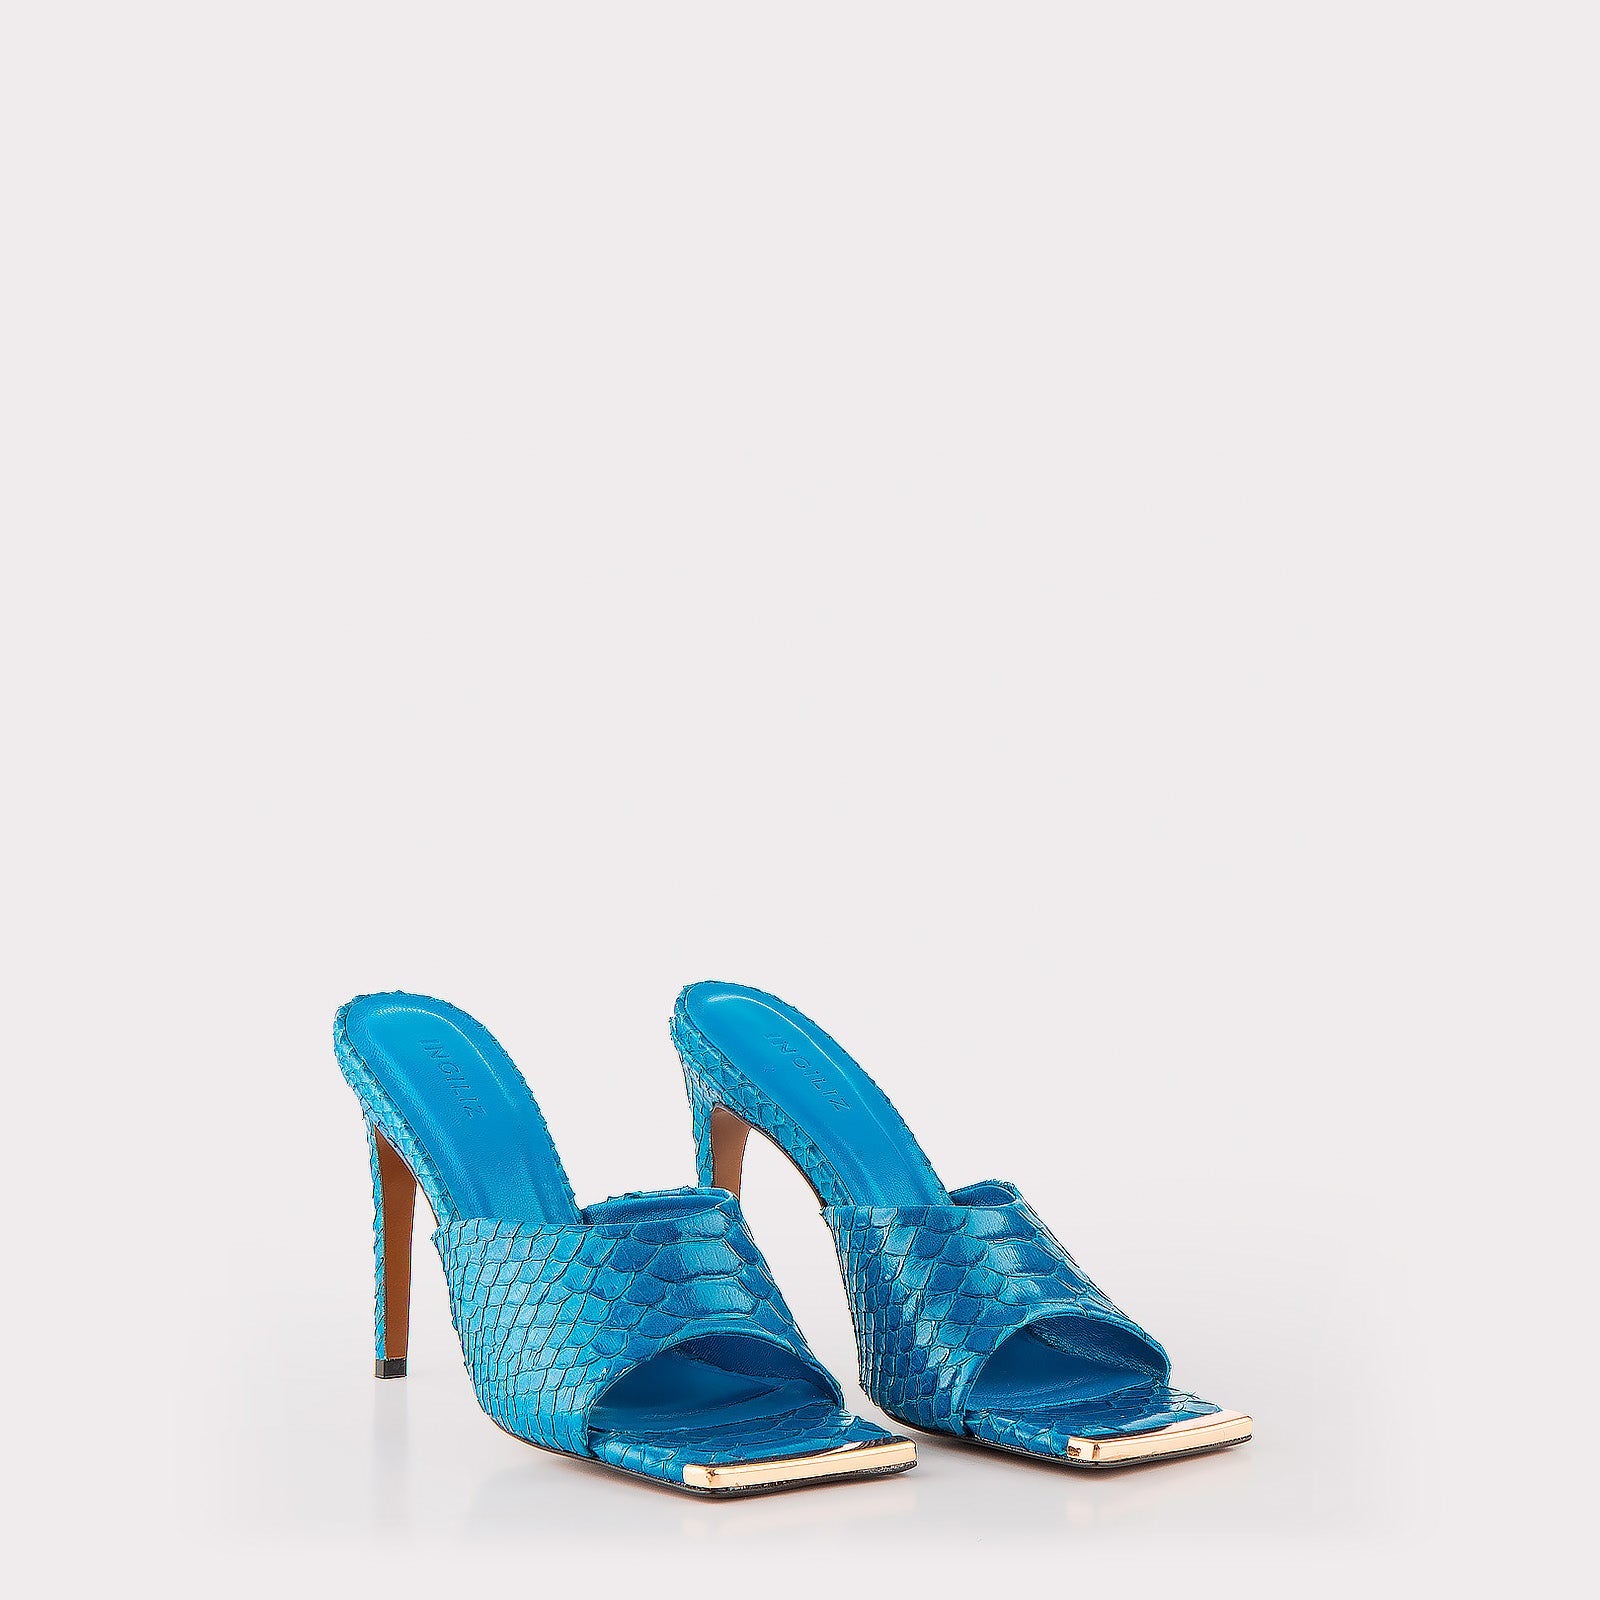 TEXTURED LEATHER MULES KALINA BLUE